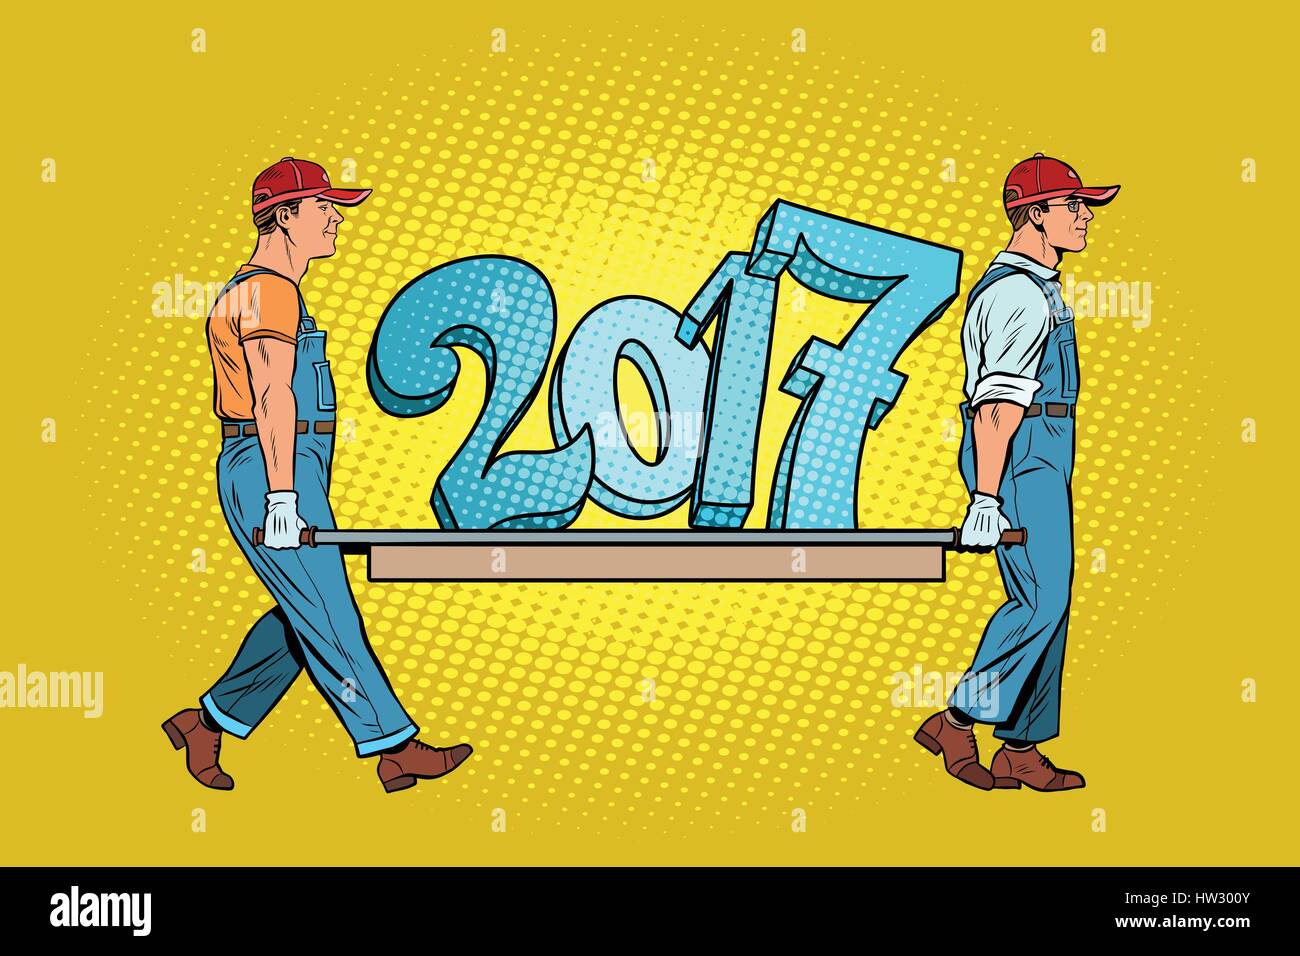 The ending 2017, figures carry movers Stock Vector